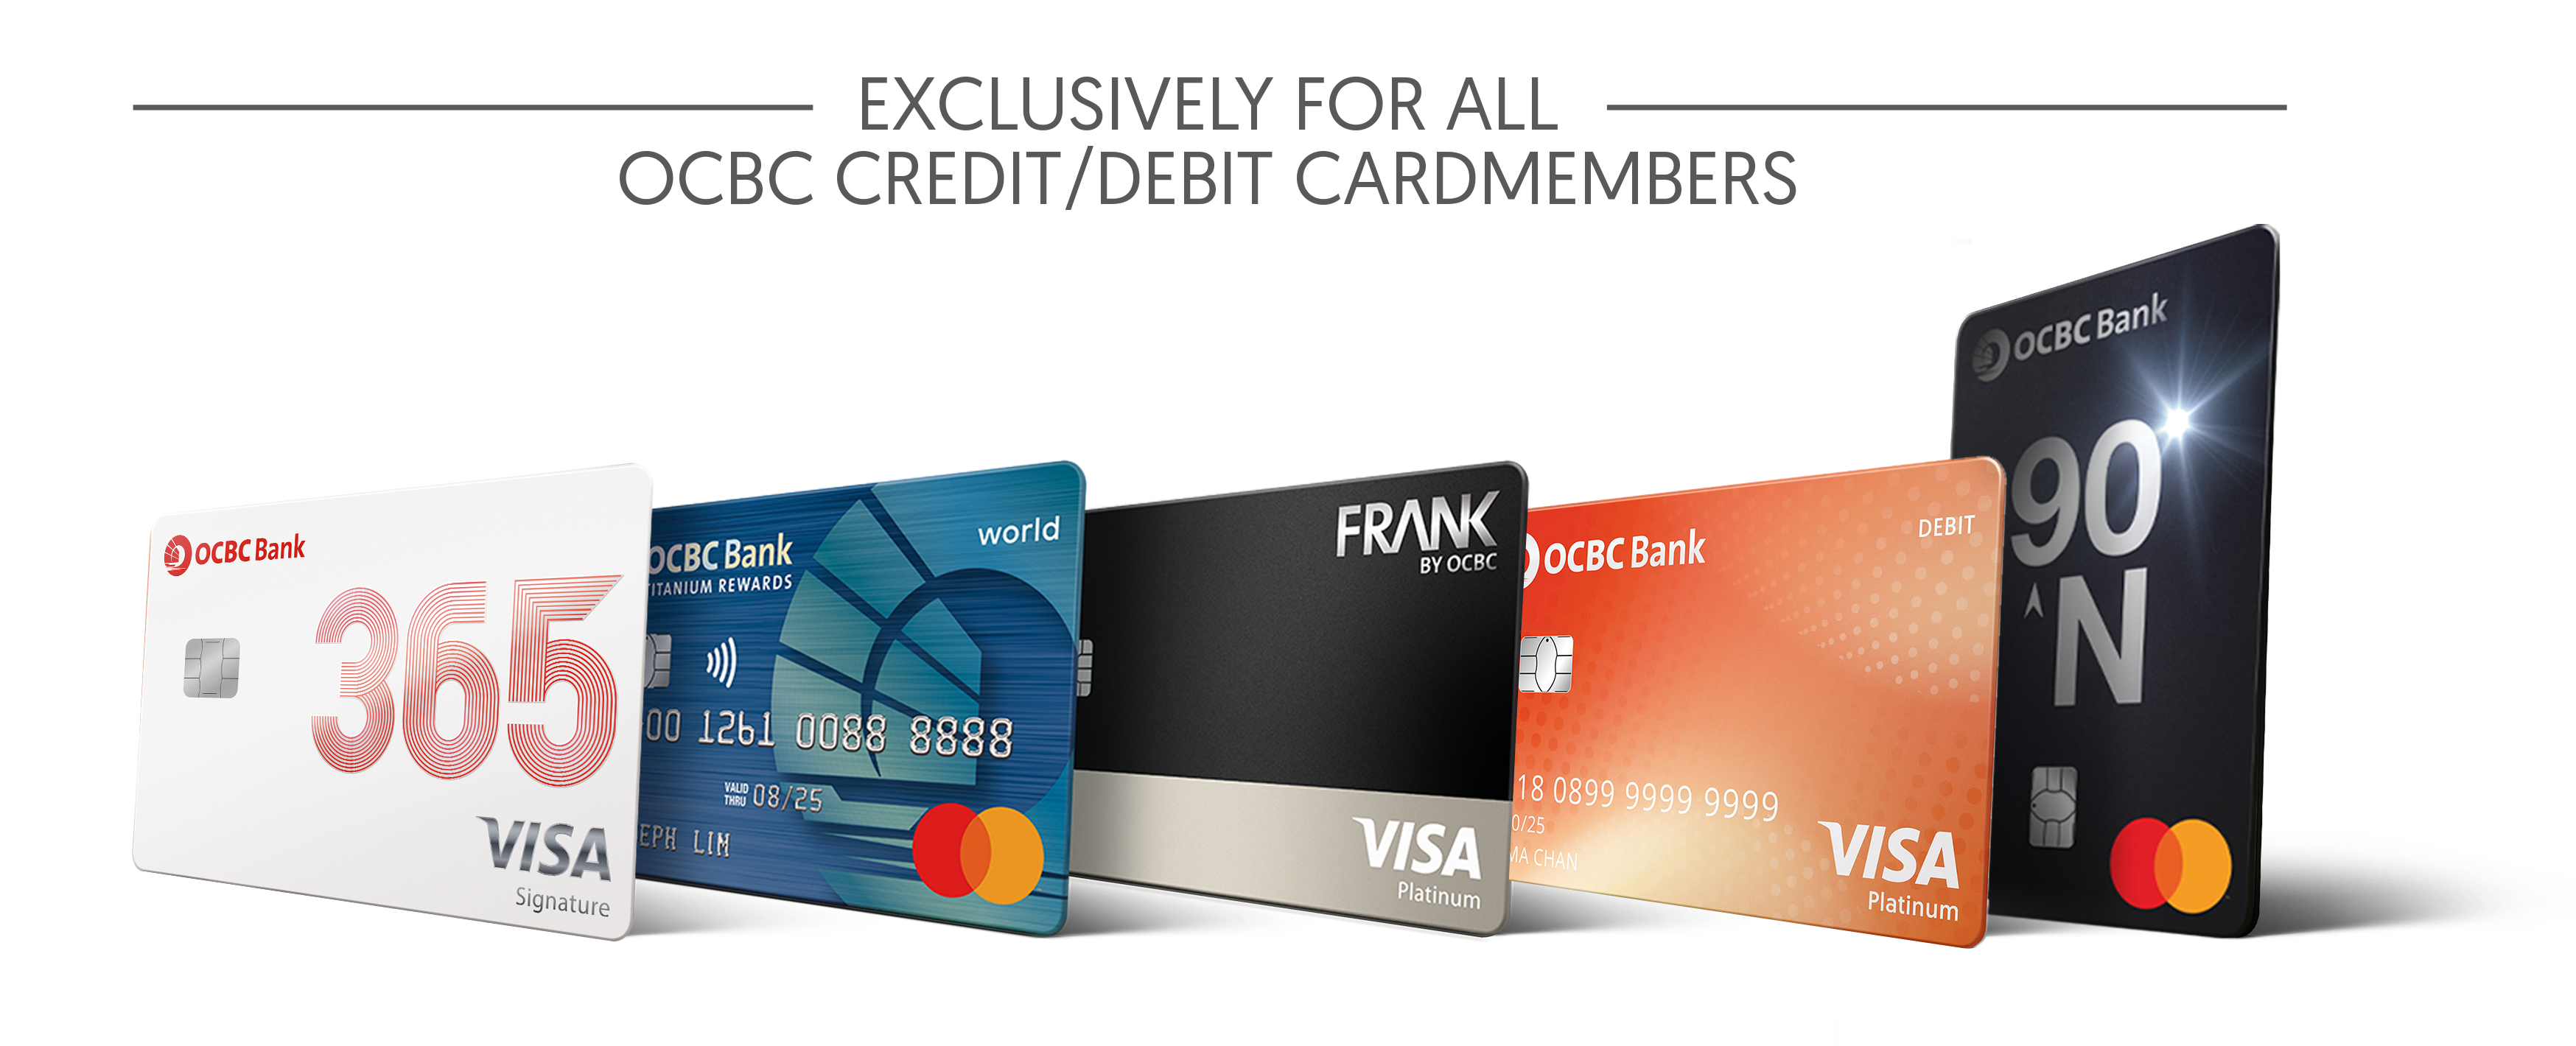 Enjoy exclusive discounts off regular items when you checkout with OCBC Cards